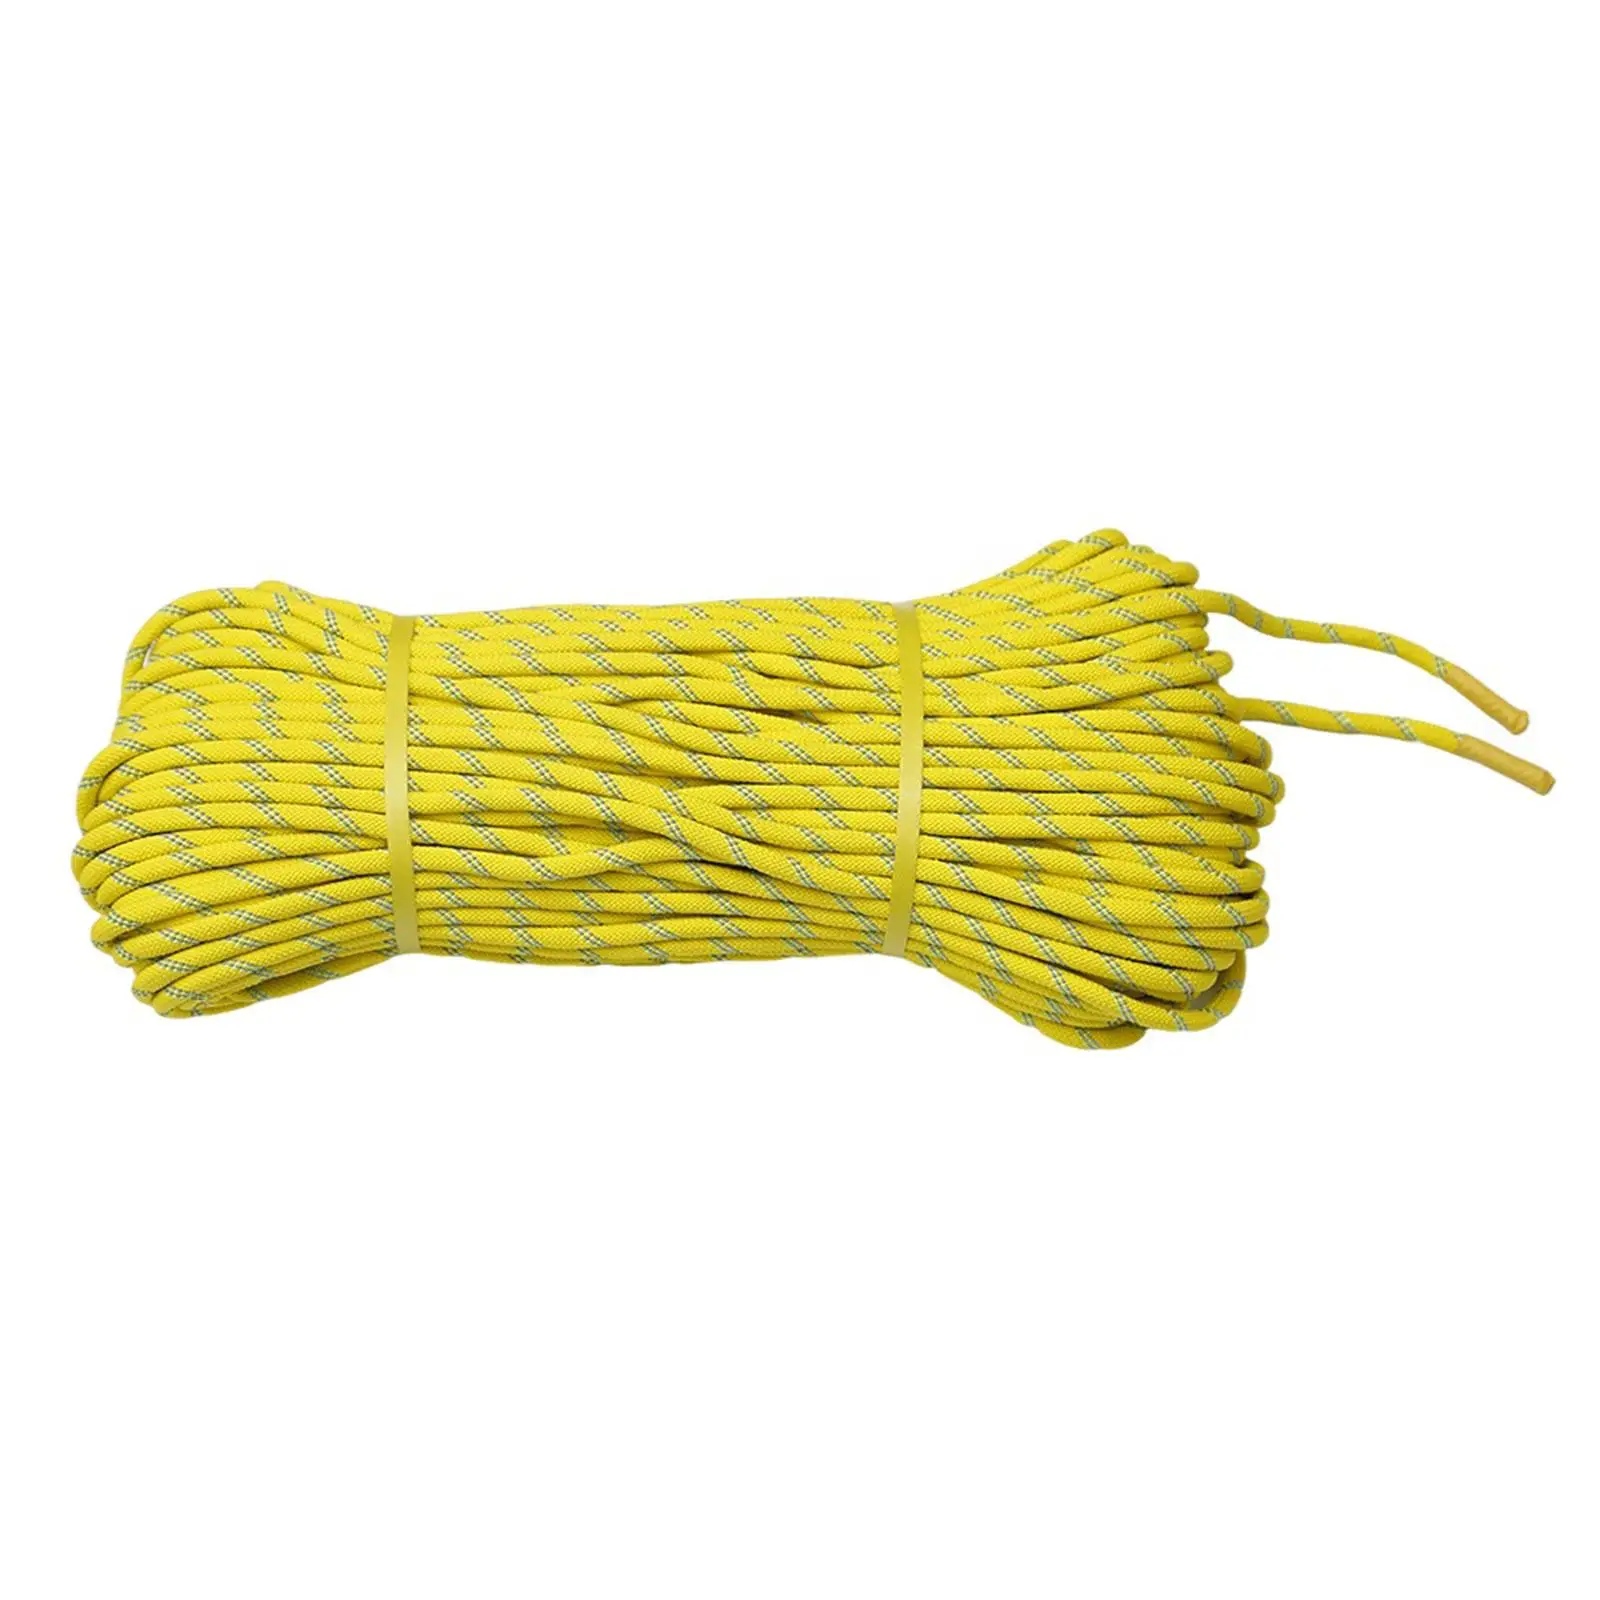 Floating Rope Accessories Flotation Device Throw Rope for Boating Kayaking Rafting